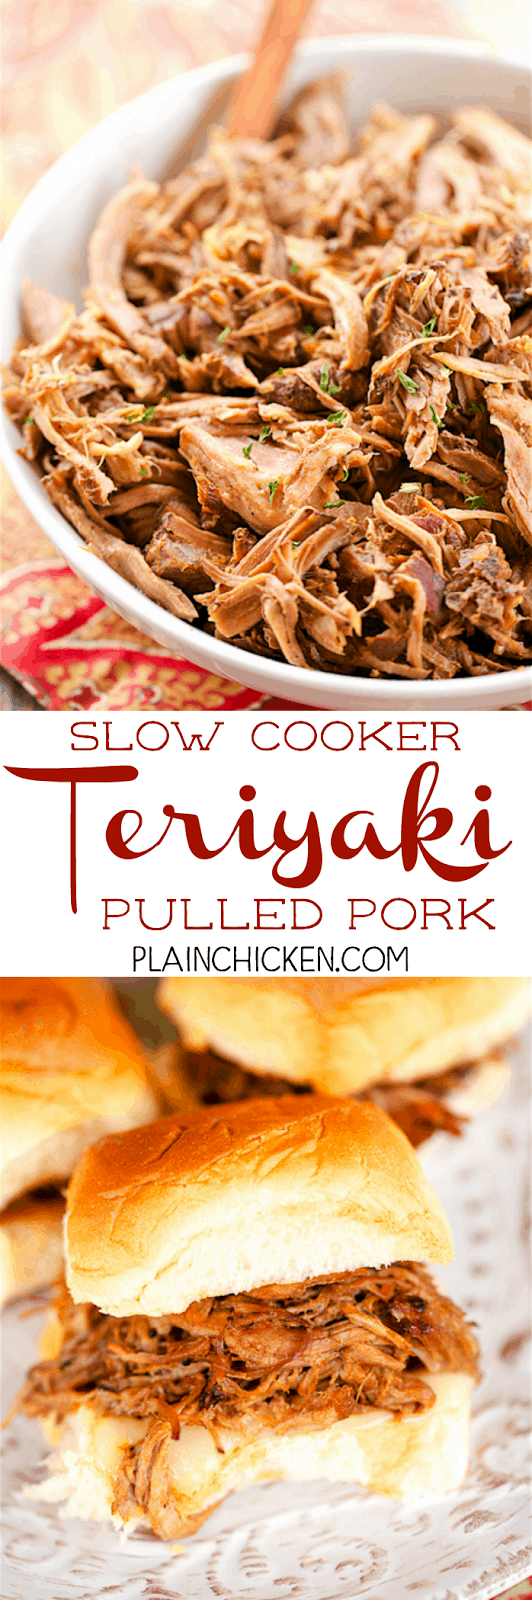 Slow Cooker Teriyaki Pulled Pork - THE BEST pulled pork!! Pork shoulder slow cooked with onions, worcestershire sauce, teriyaki sauce and water. I ate this for a week! SO good!! Serve on Hawaiian Rolls with provolone cheese for parties. Can assemble ahead of time and reheat when ready to serve.